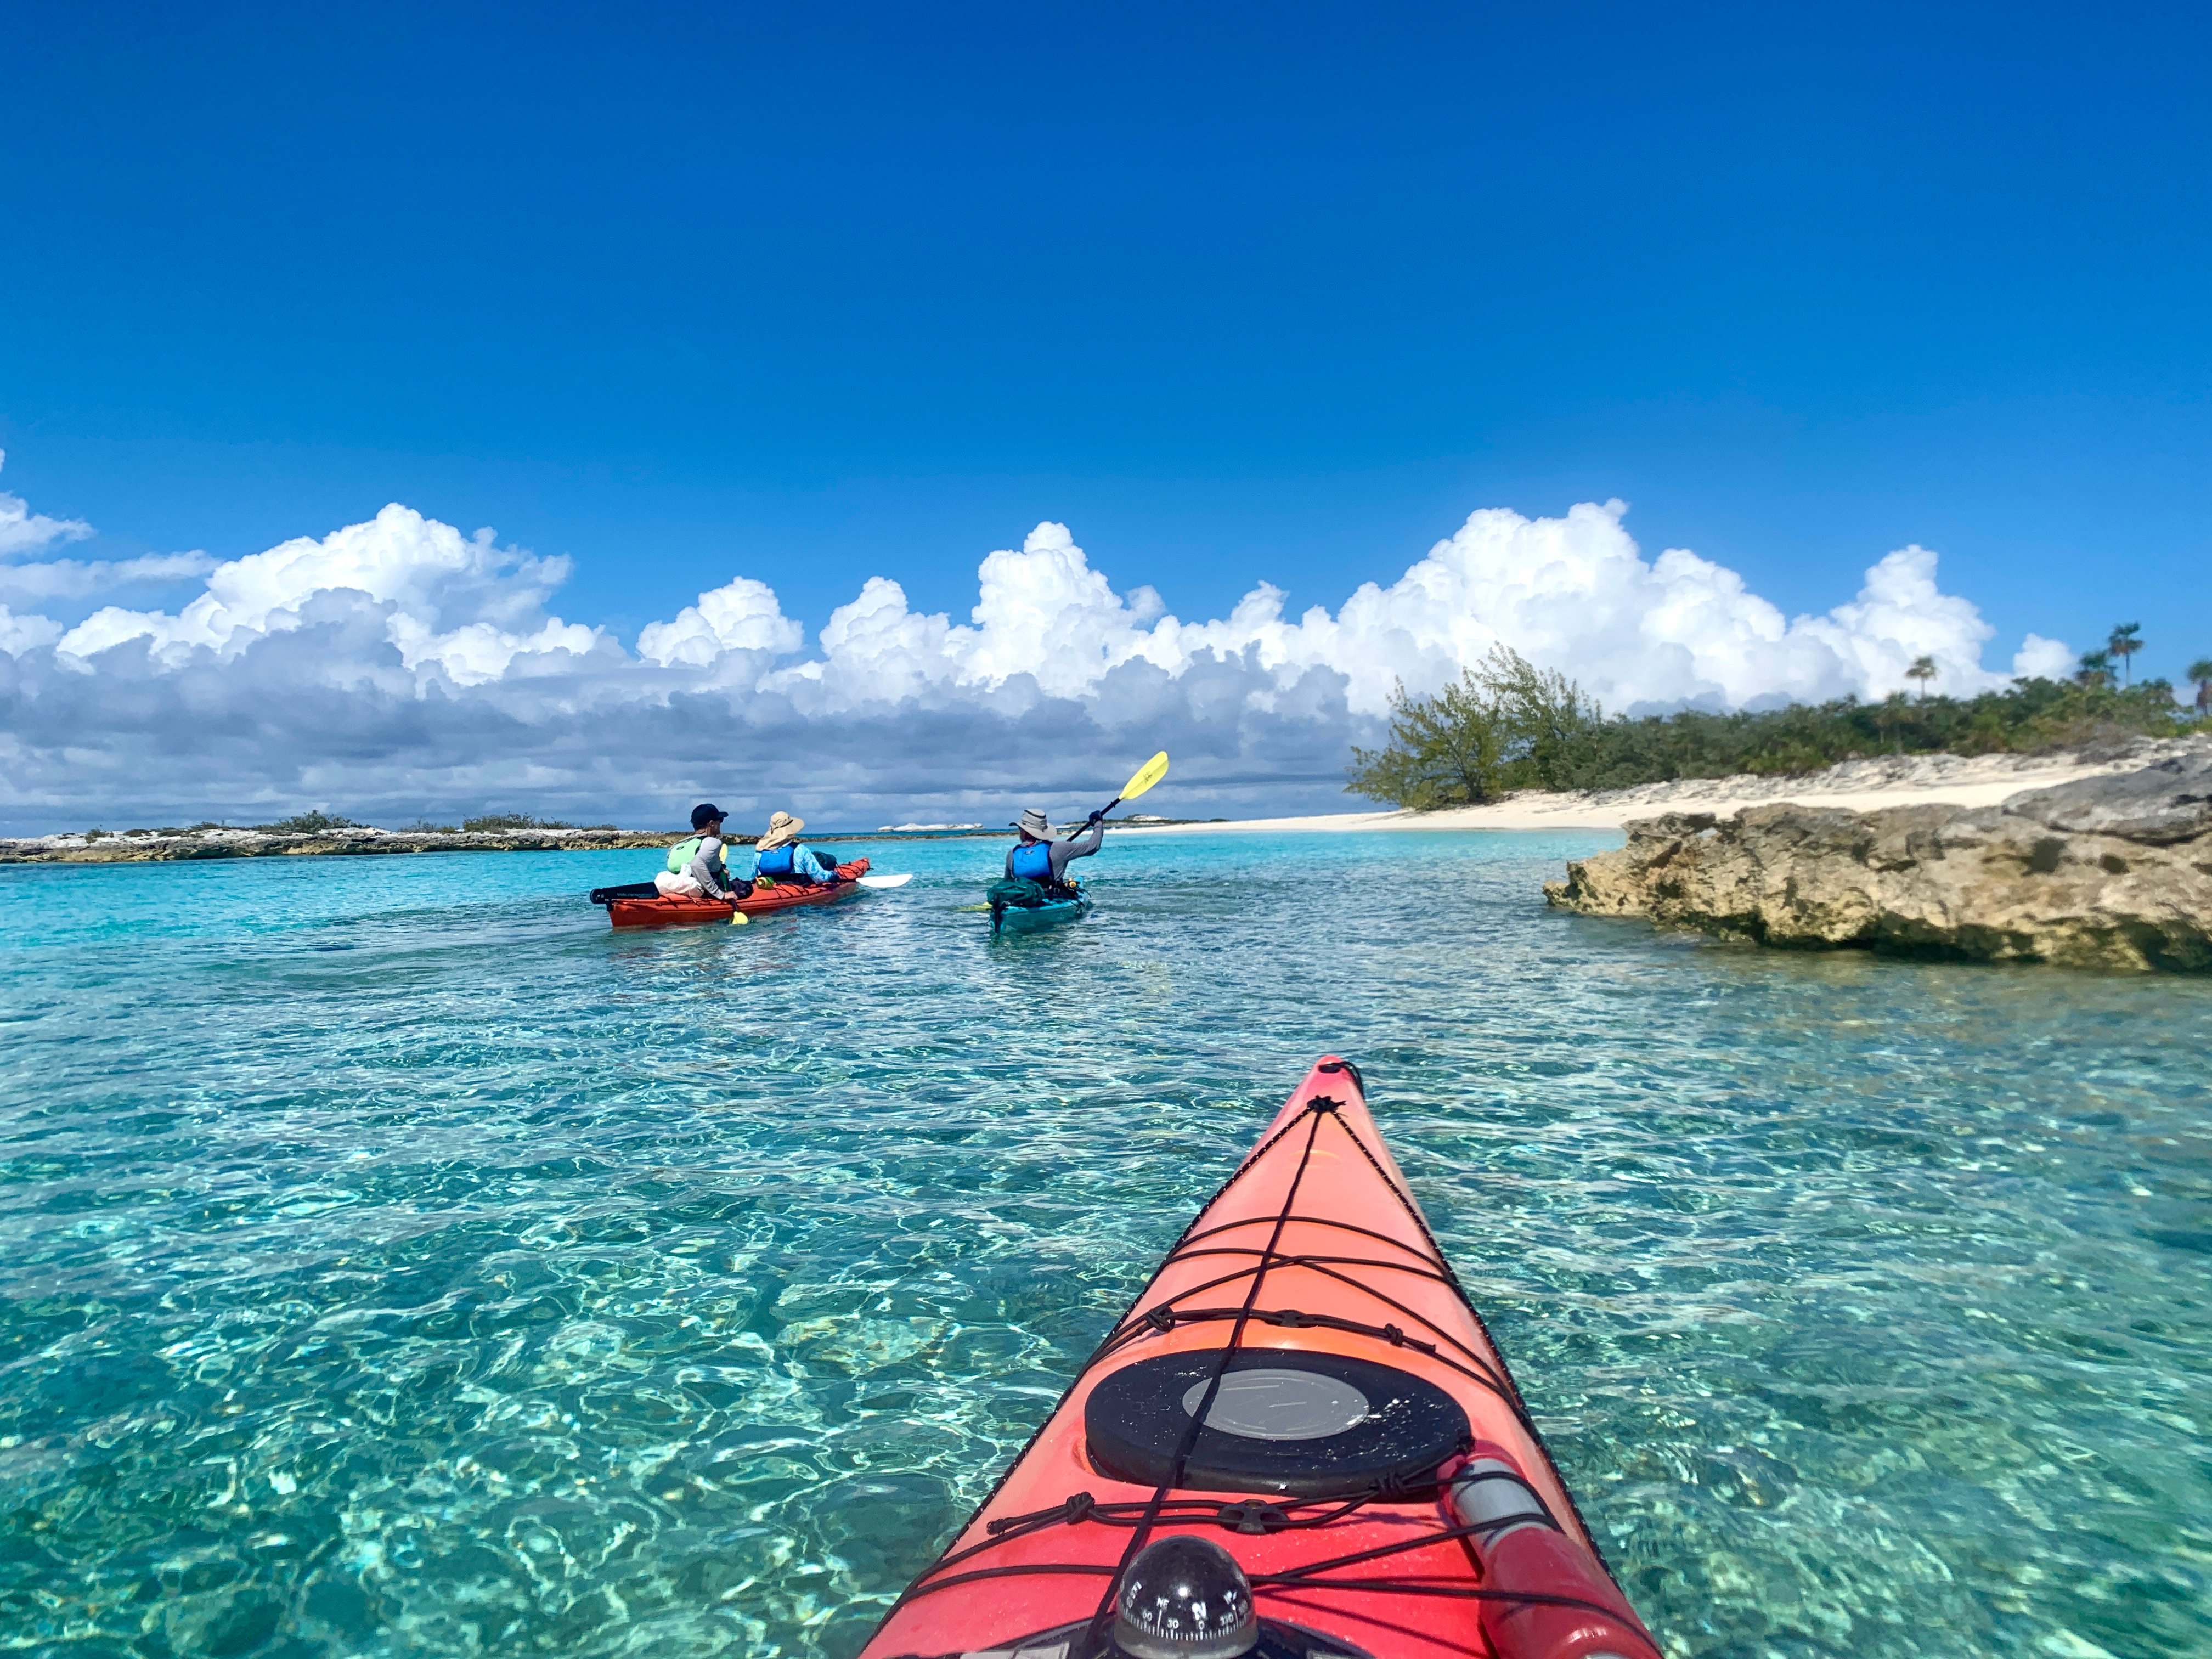 View from a kayak looking ahead to three other kayakers gliding over crystal clear water